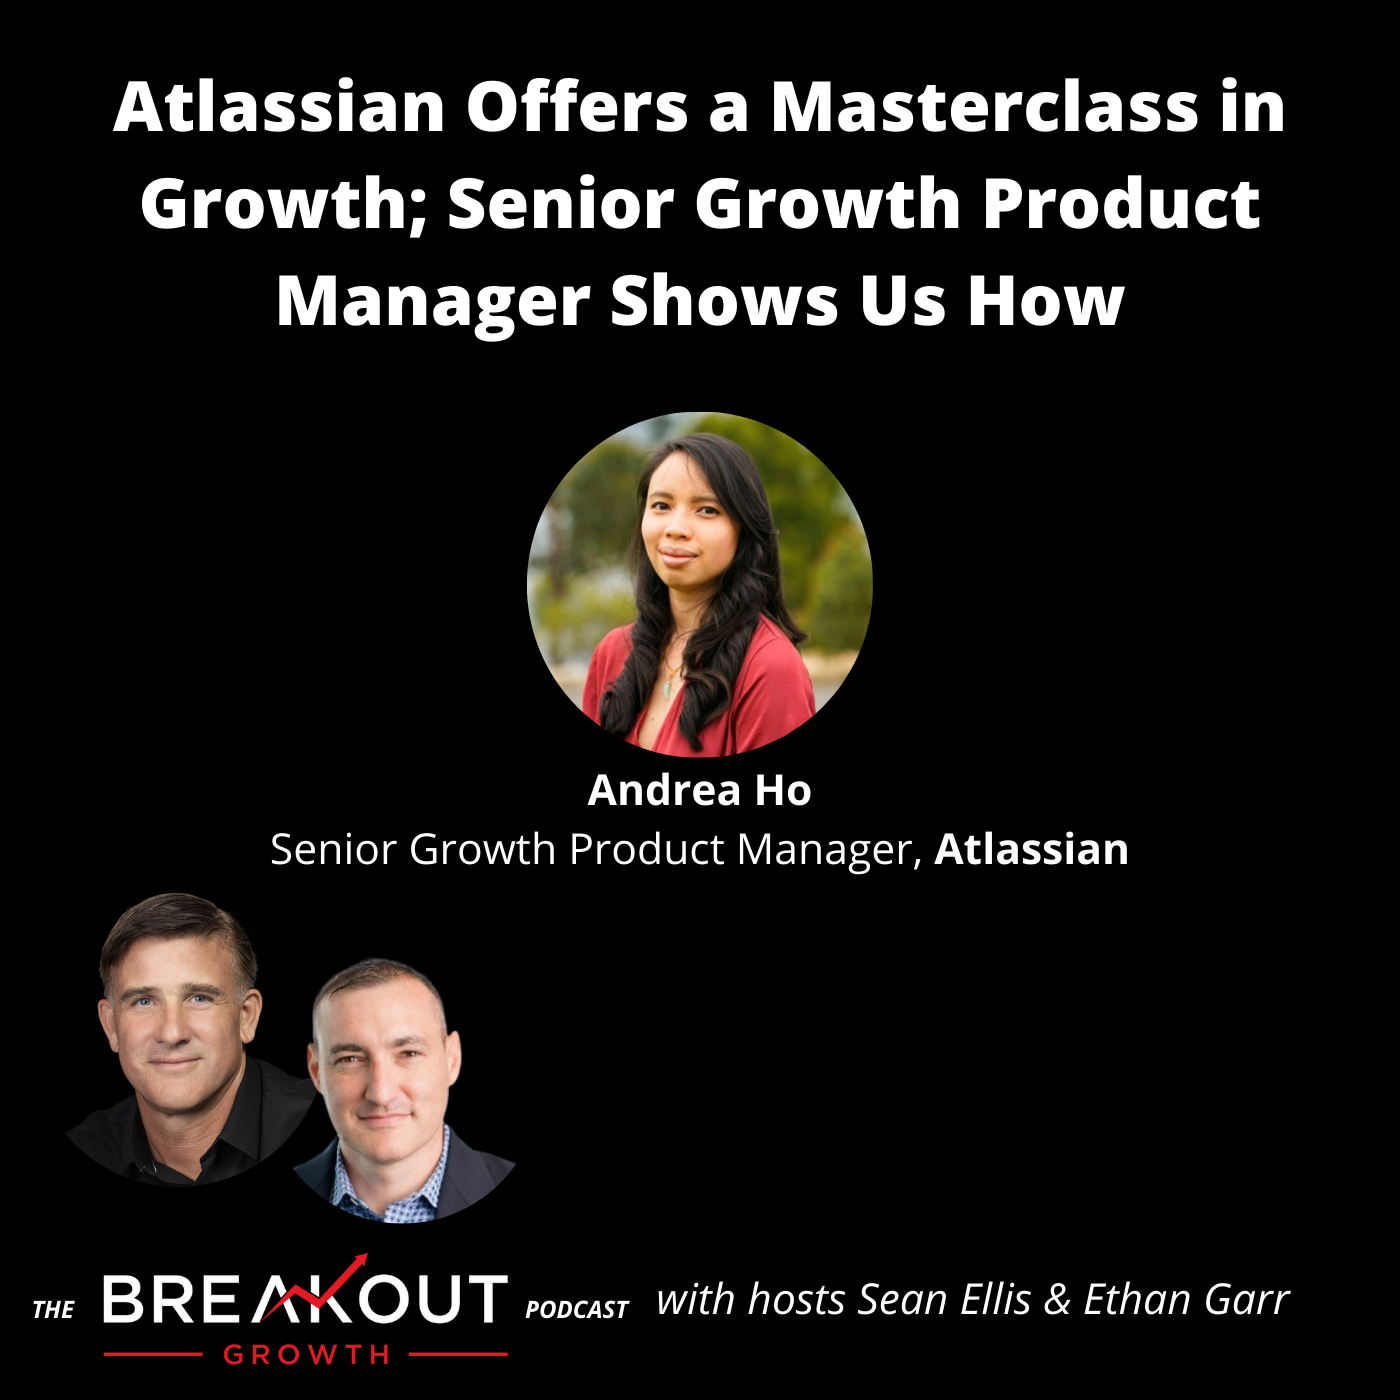 Atlassian Offers a Masterclass in Growth; Senior Growth Product Manager Shows us How